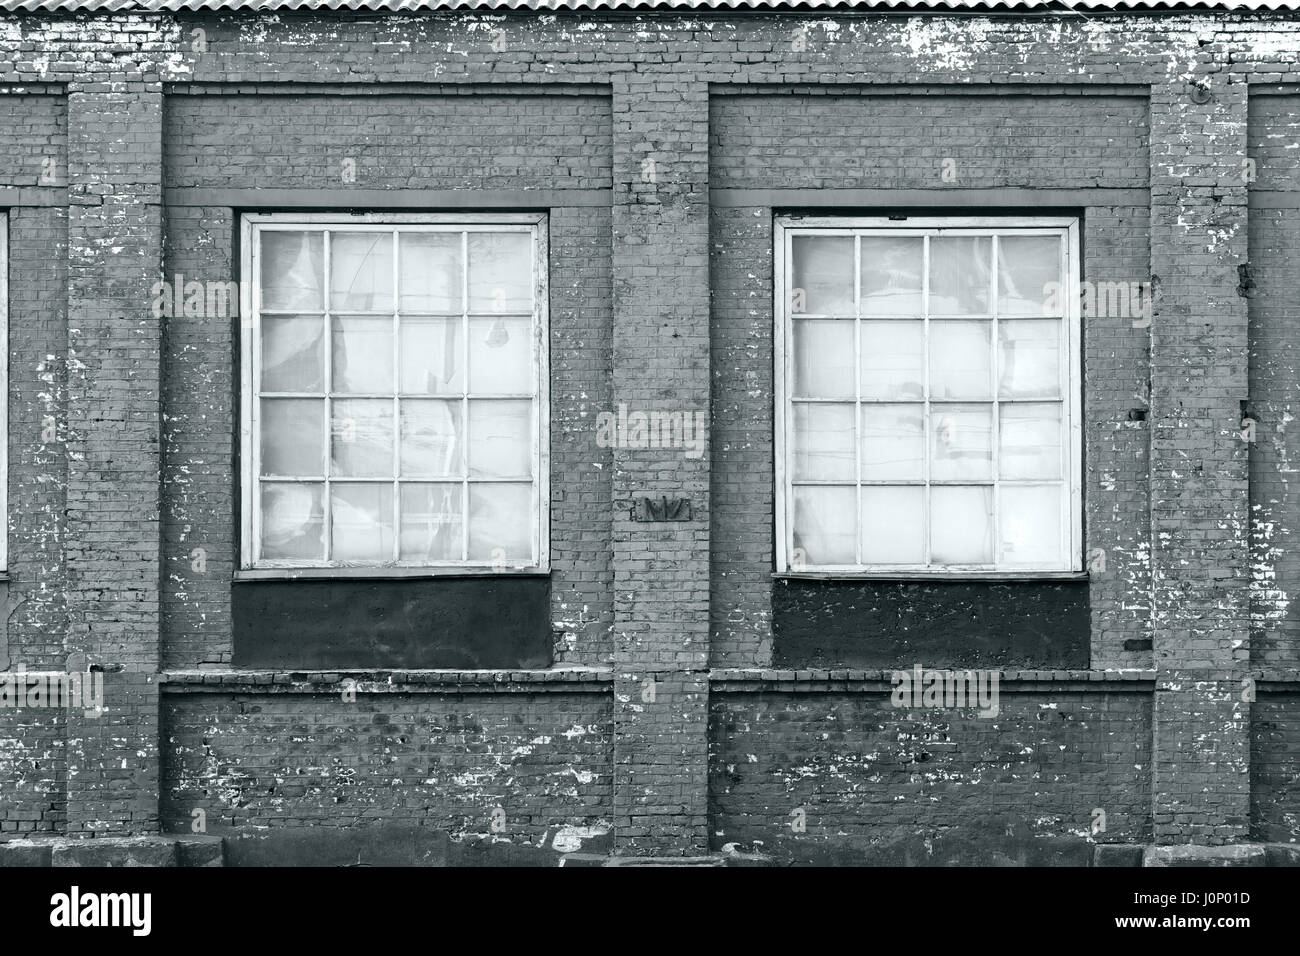 brick wall of an old factory building facade with windows Stock Photo